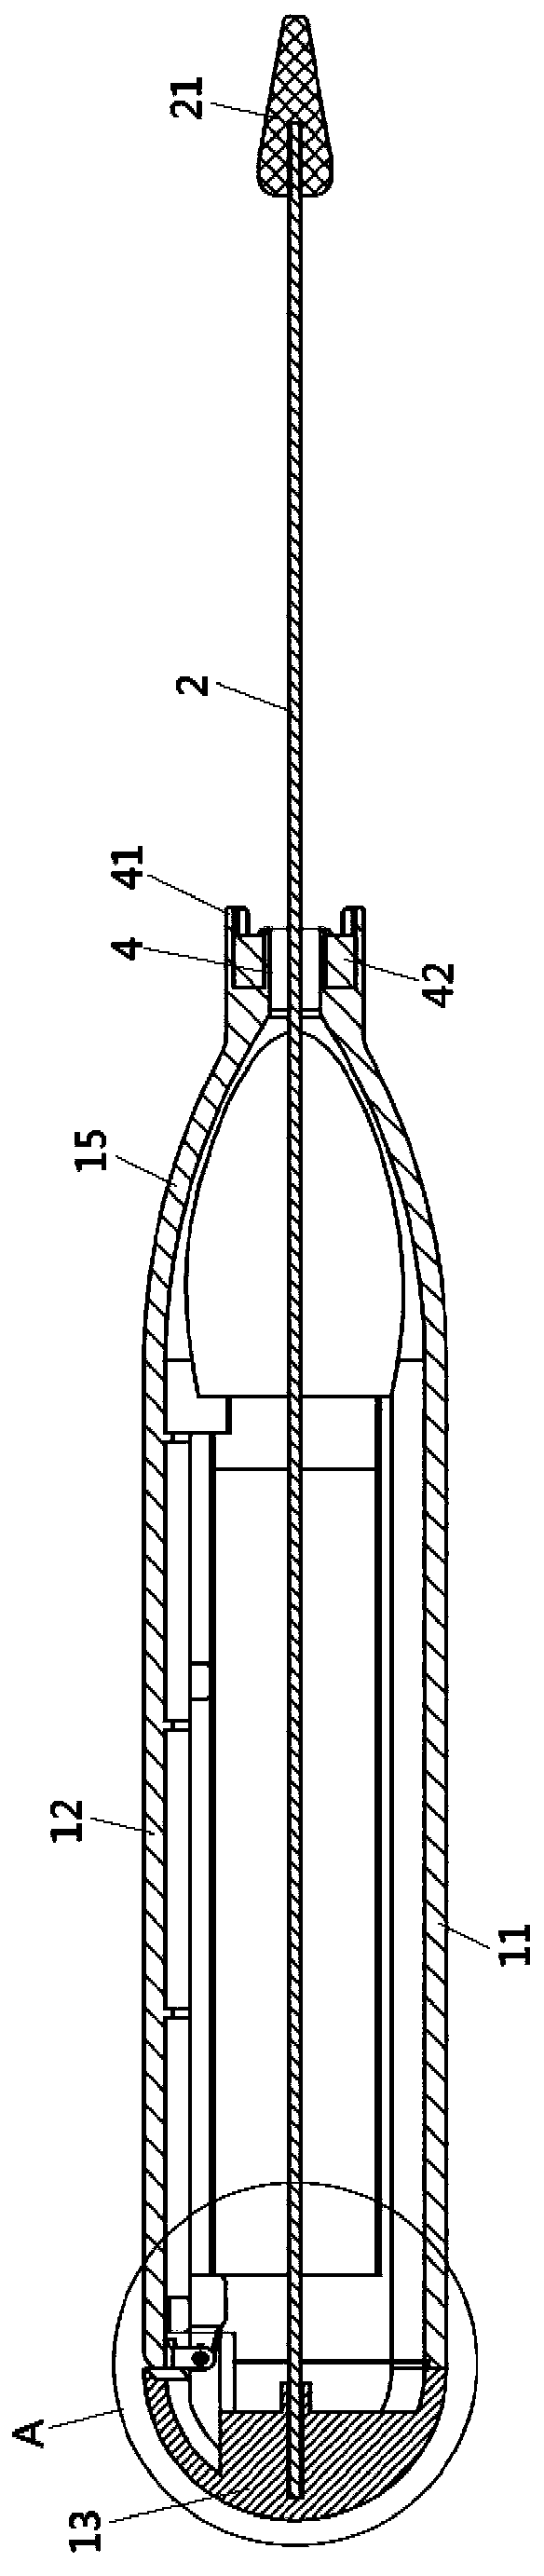 Covered stent conveying and releasing system